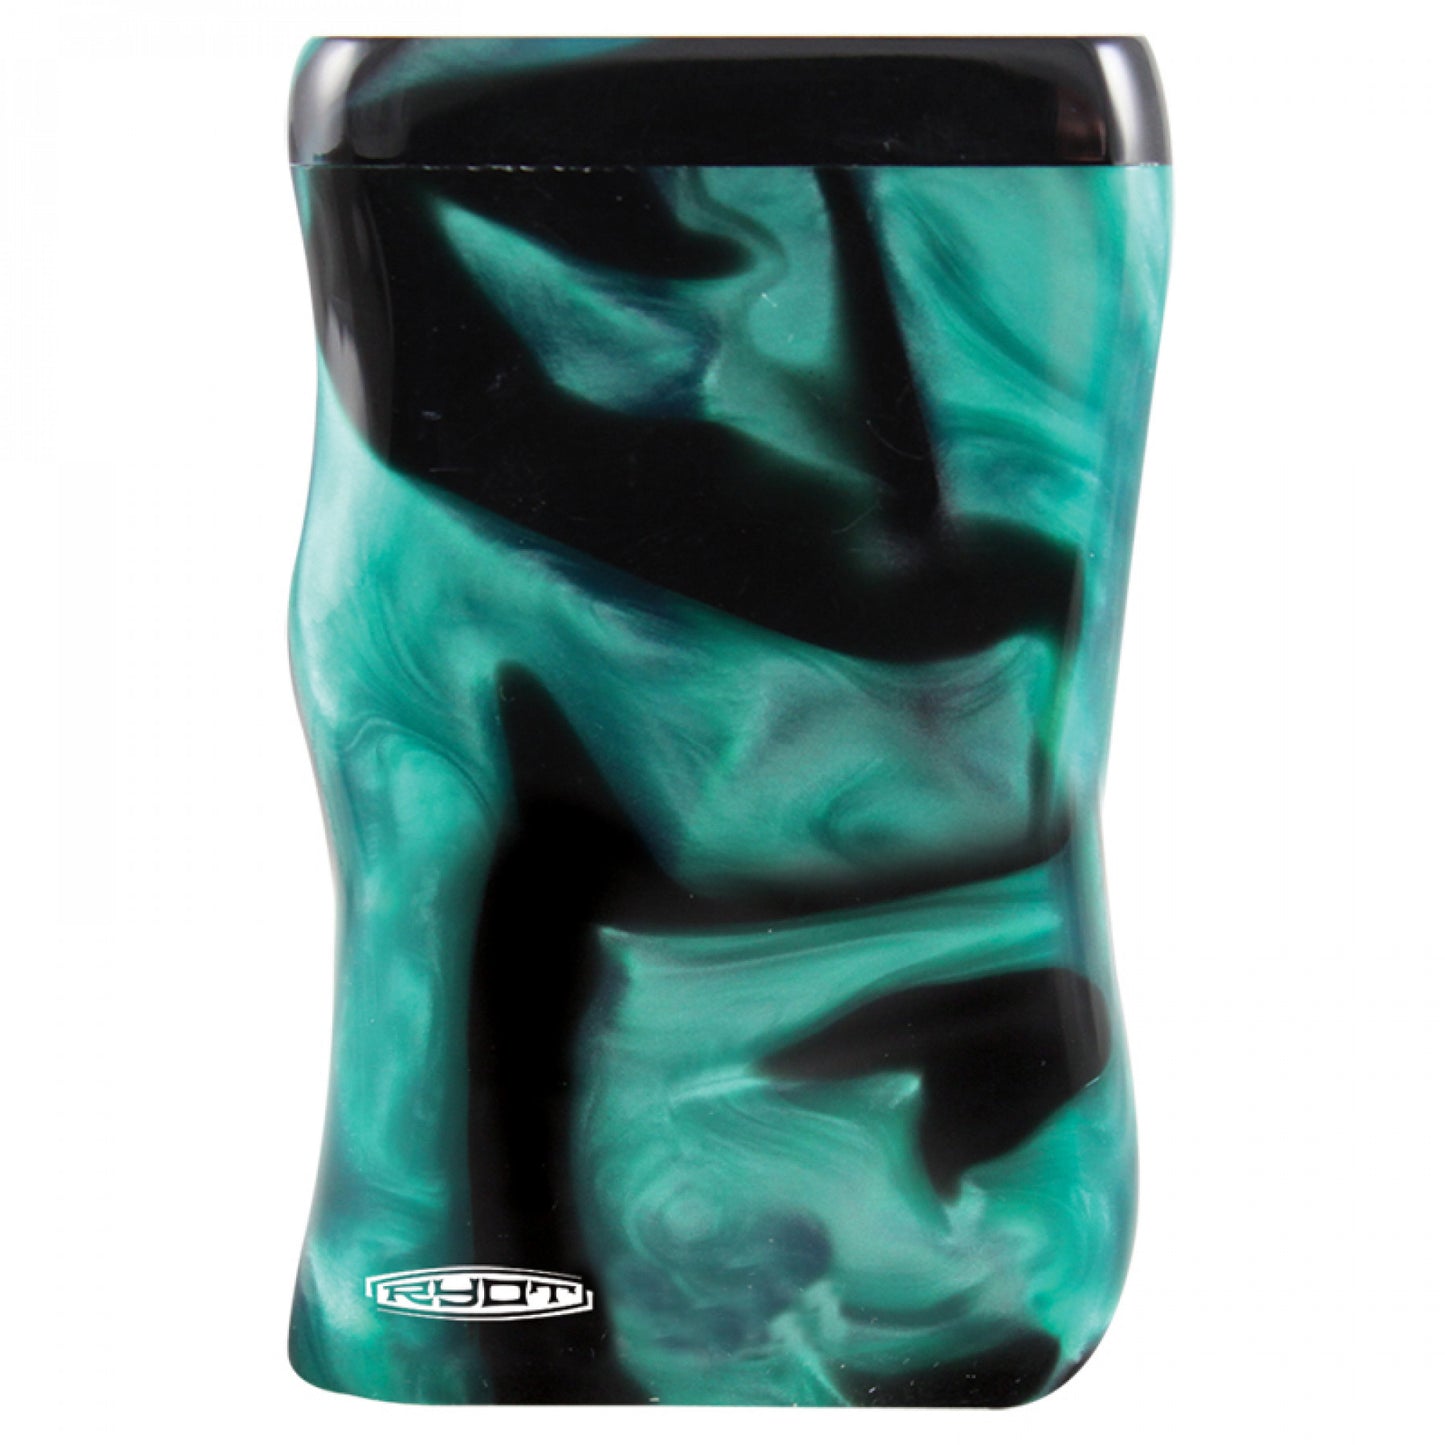 Ryot Acrylic Dugout - Green and Black